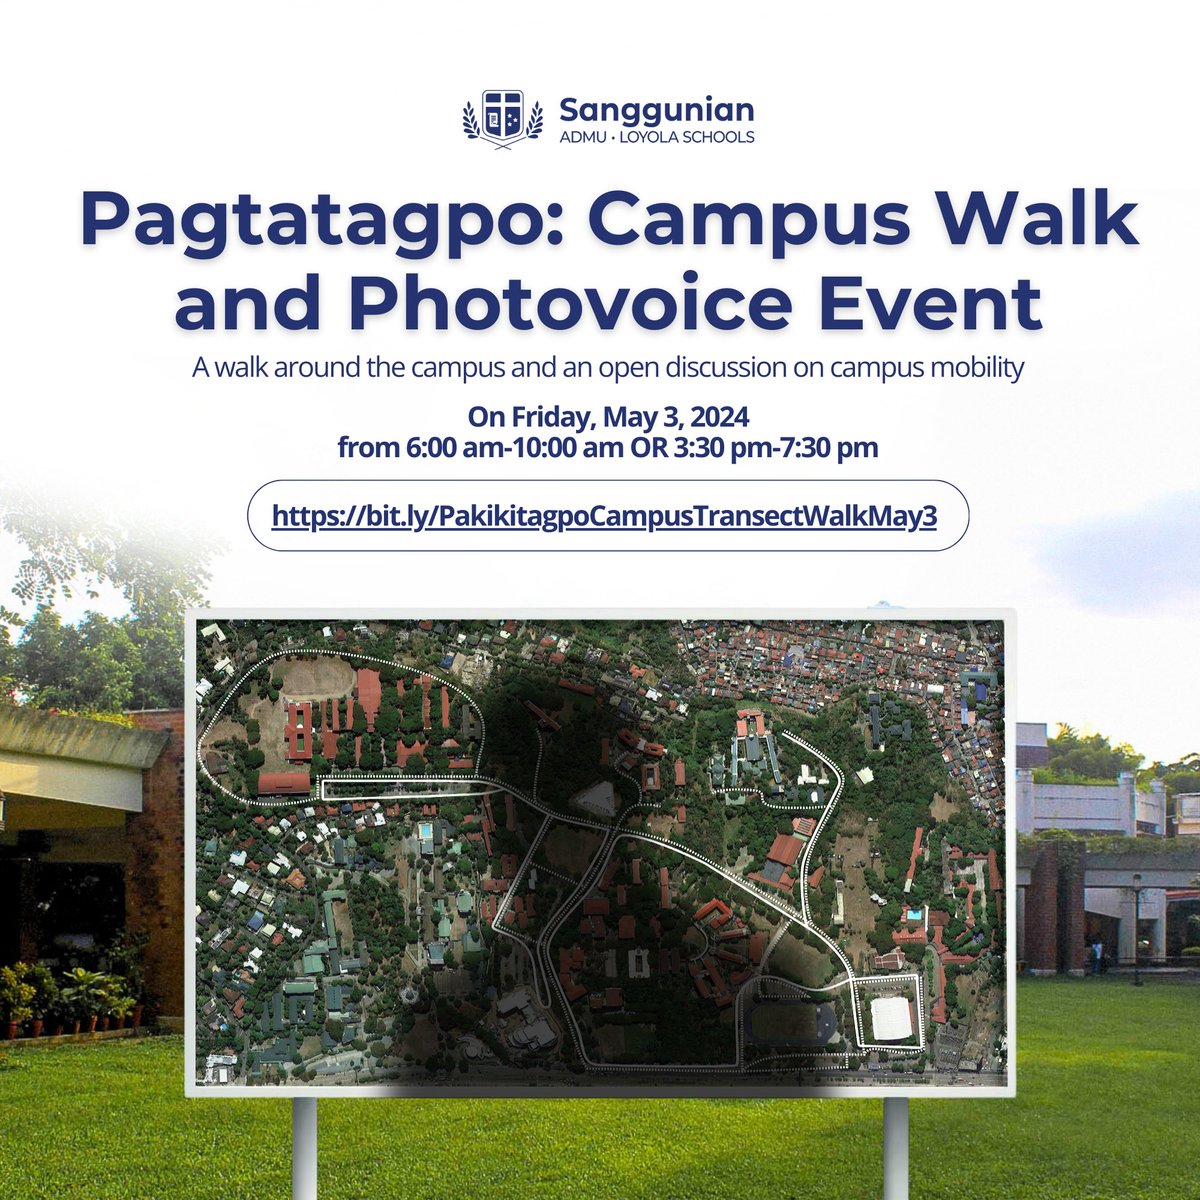 Ready your feet and your cameras, Ateneans! 👣📸

The whole Ateneo community is invited to Pagtatagpo: Campus Walk and Photovoice Event, spearheaded by the Campus Mobility Forum Conveners in collaboration with Tagpuan: Center for Dialogue, Research, and Collaboration...